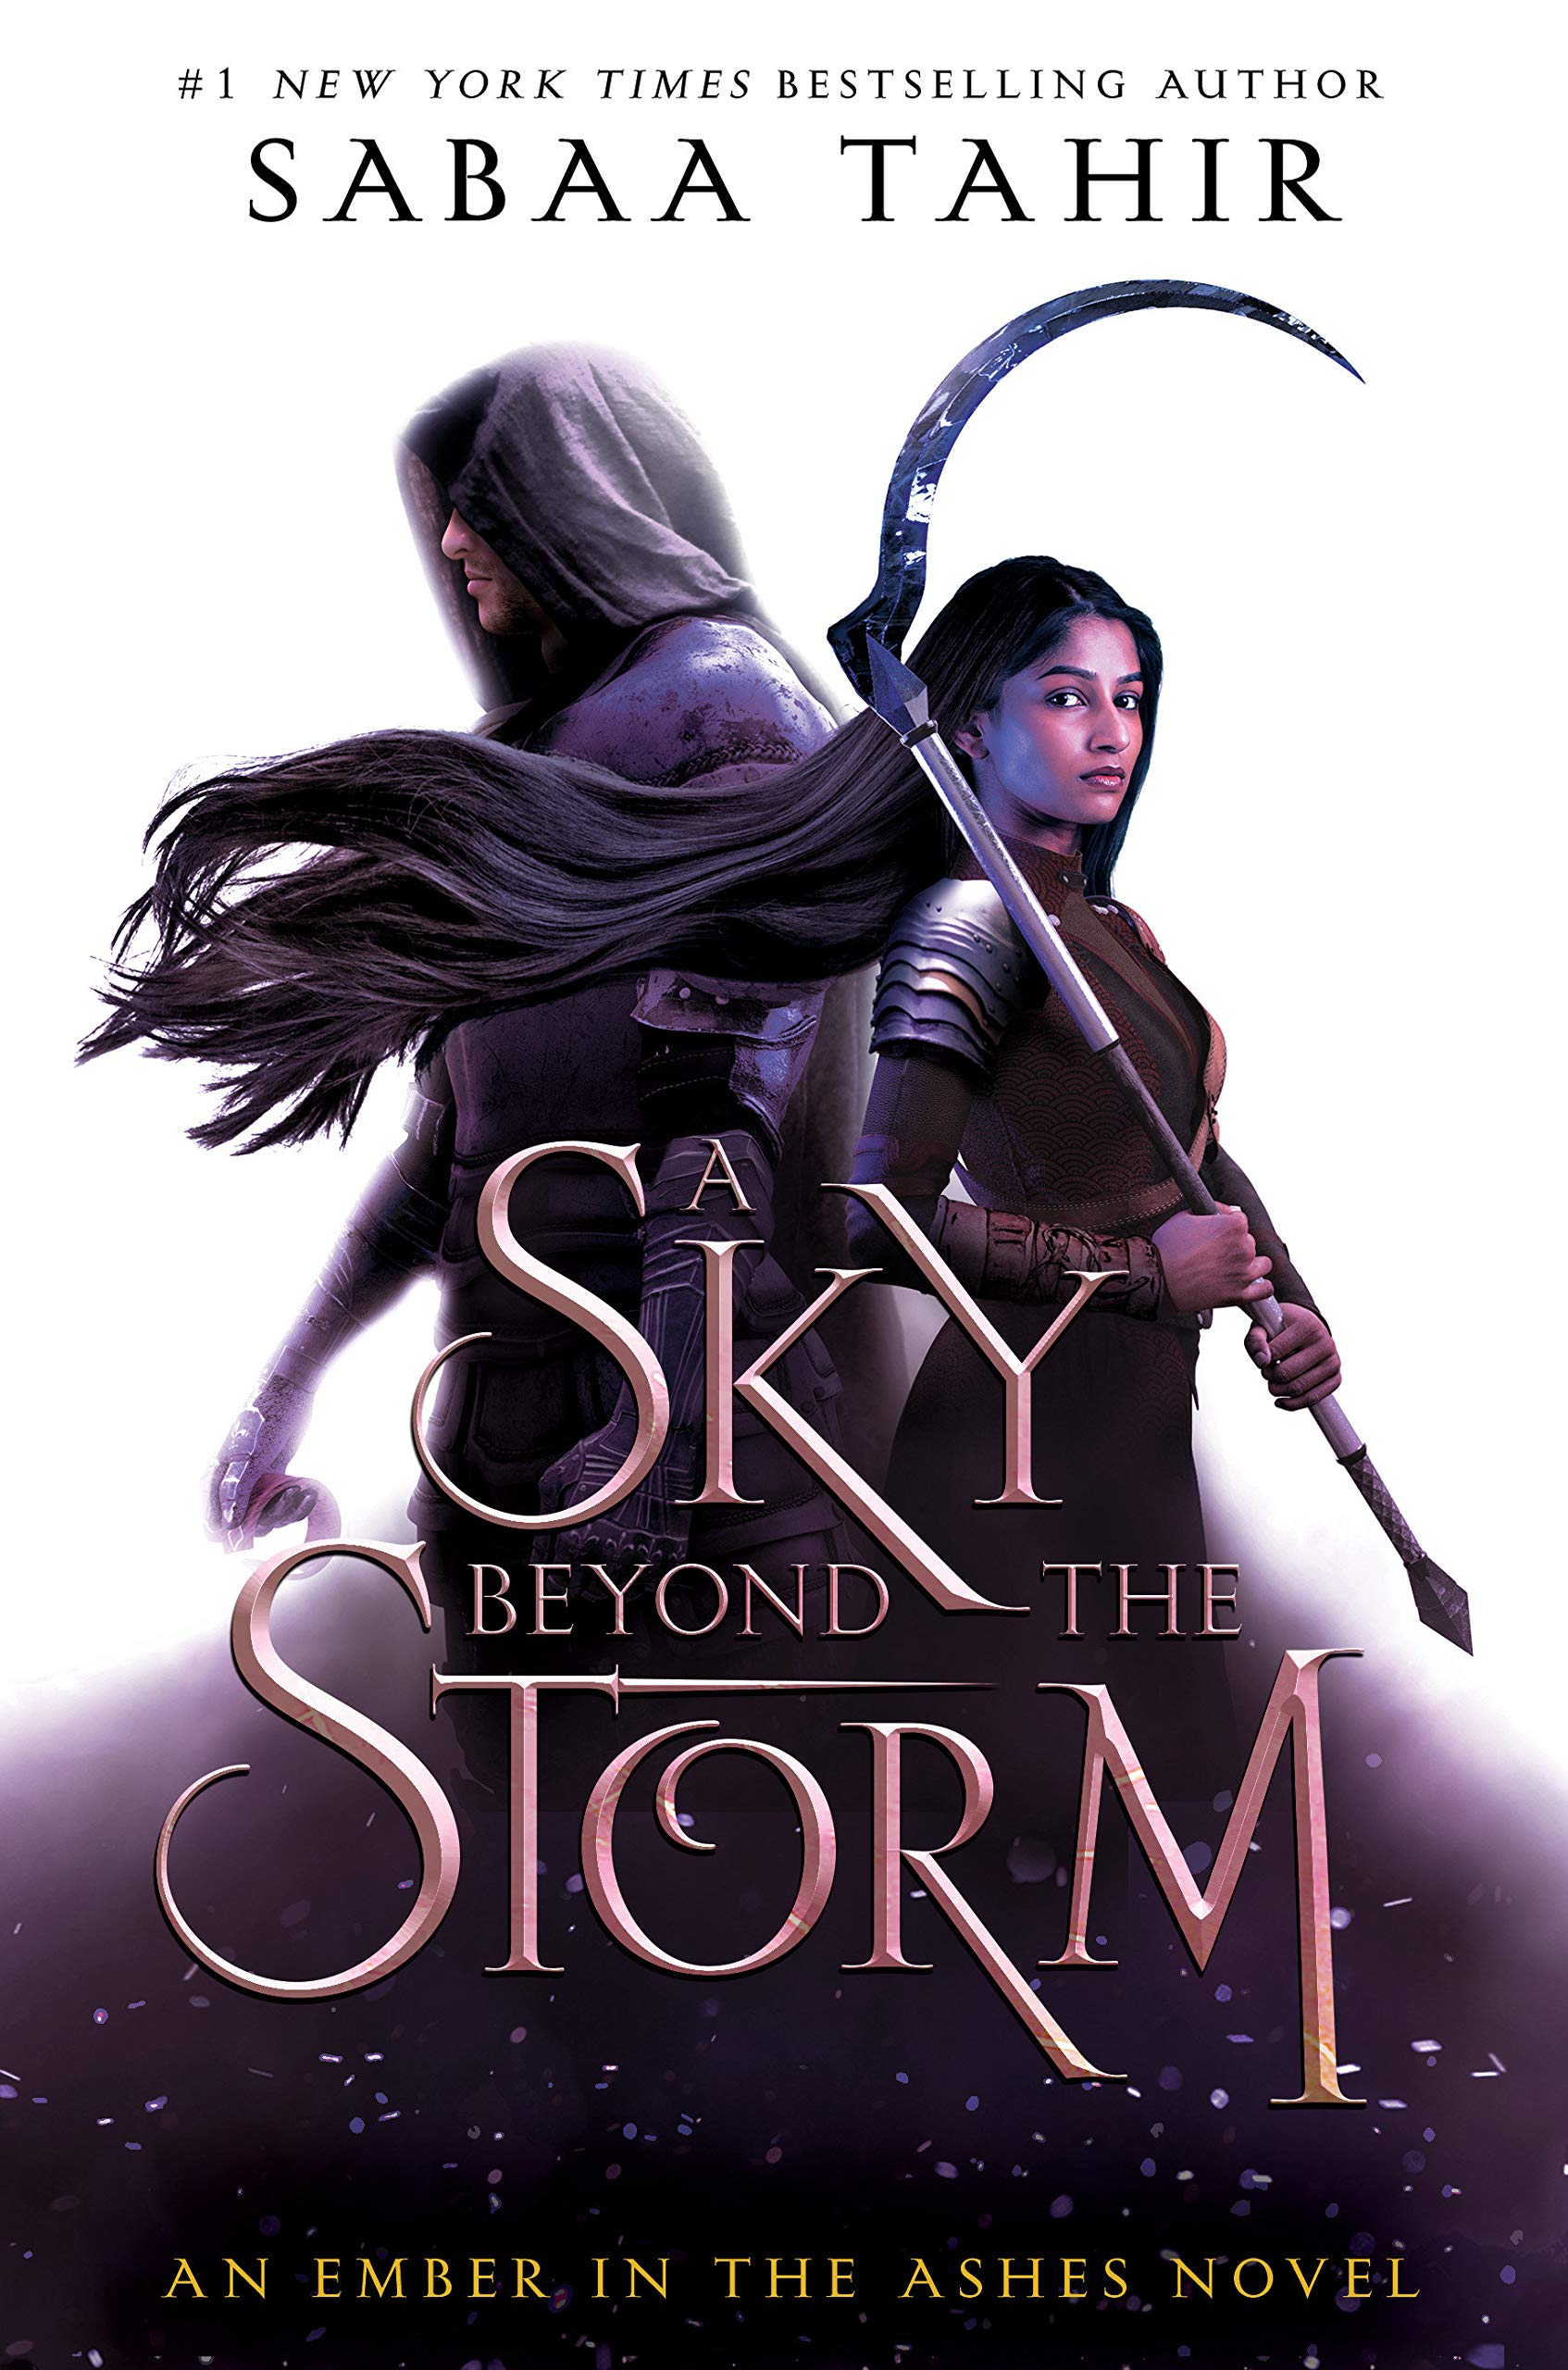 the image features the cover of Sabaa Tahir's book 'A Sky Beyond the Storm' from her series 'An Ember in the Ashes'